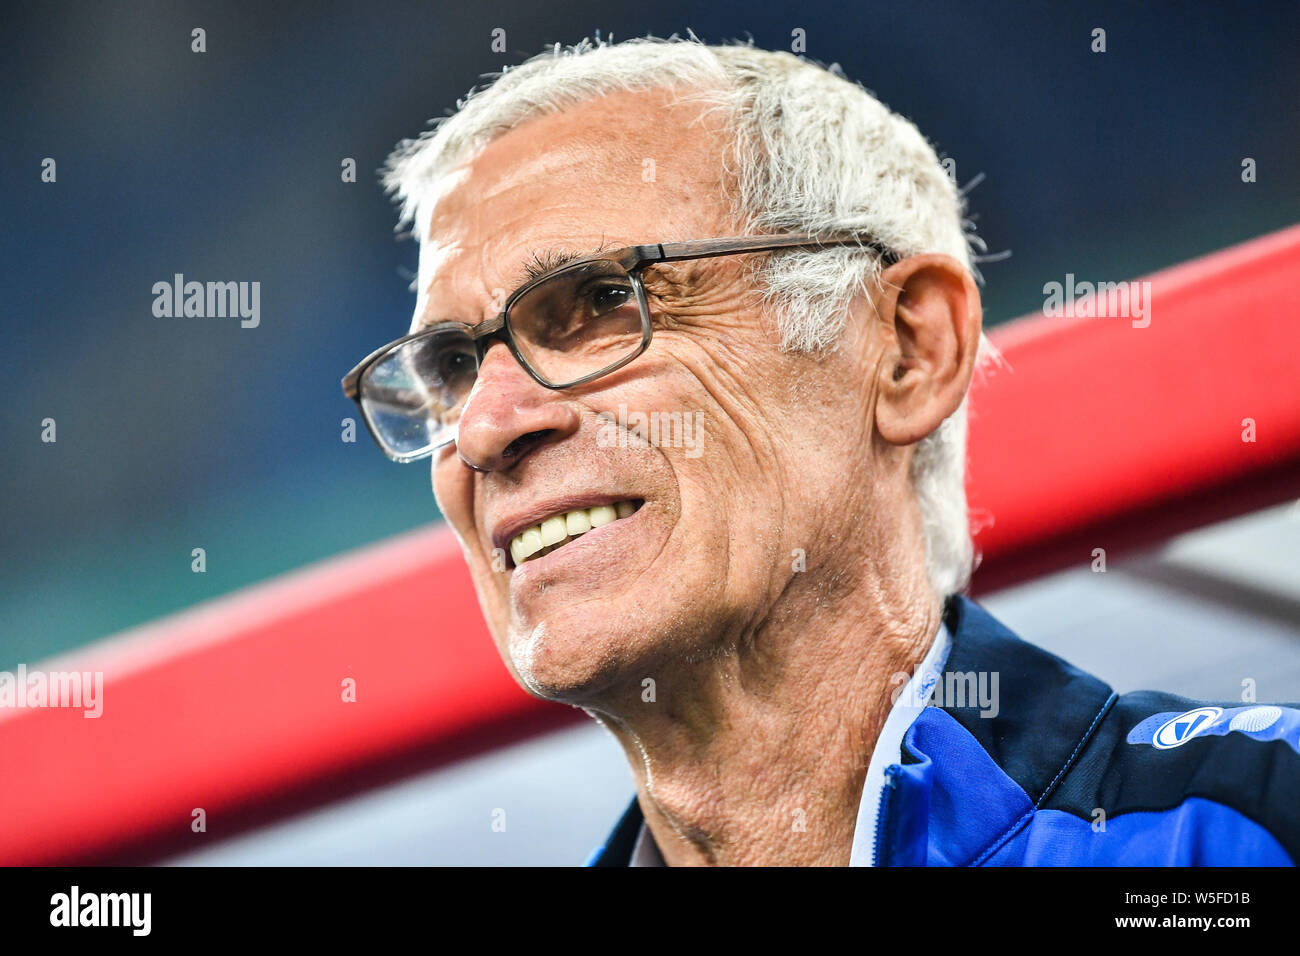 Head coach Hector Cuper of Uzbekistan reacts before their semi-final match of the 2019 China Cup International Football Championship against Uruguay i Stock Photo